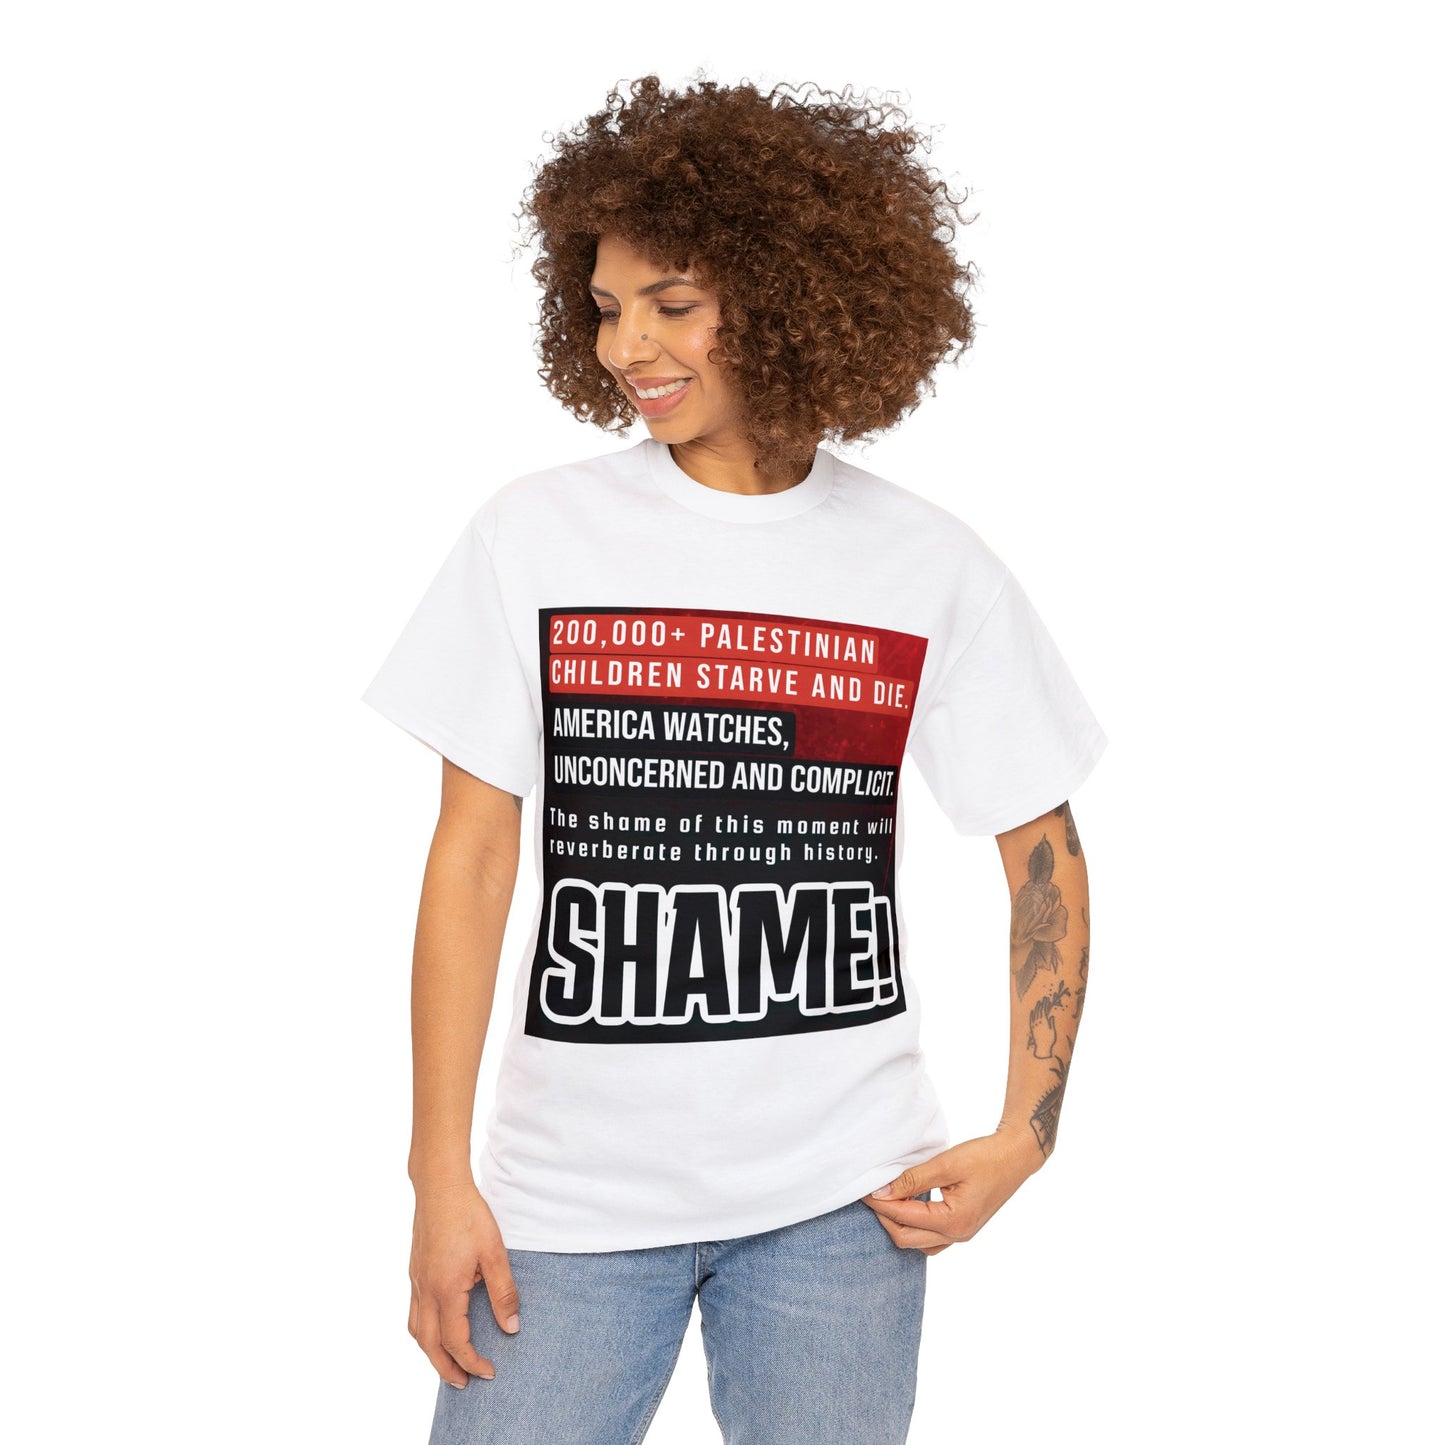 T-SHIRT: USA SHAME - Unisex Heavy Cotton Tee - Express shipping available